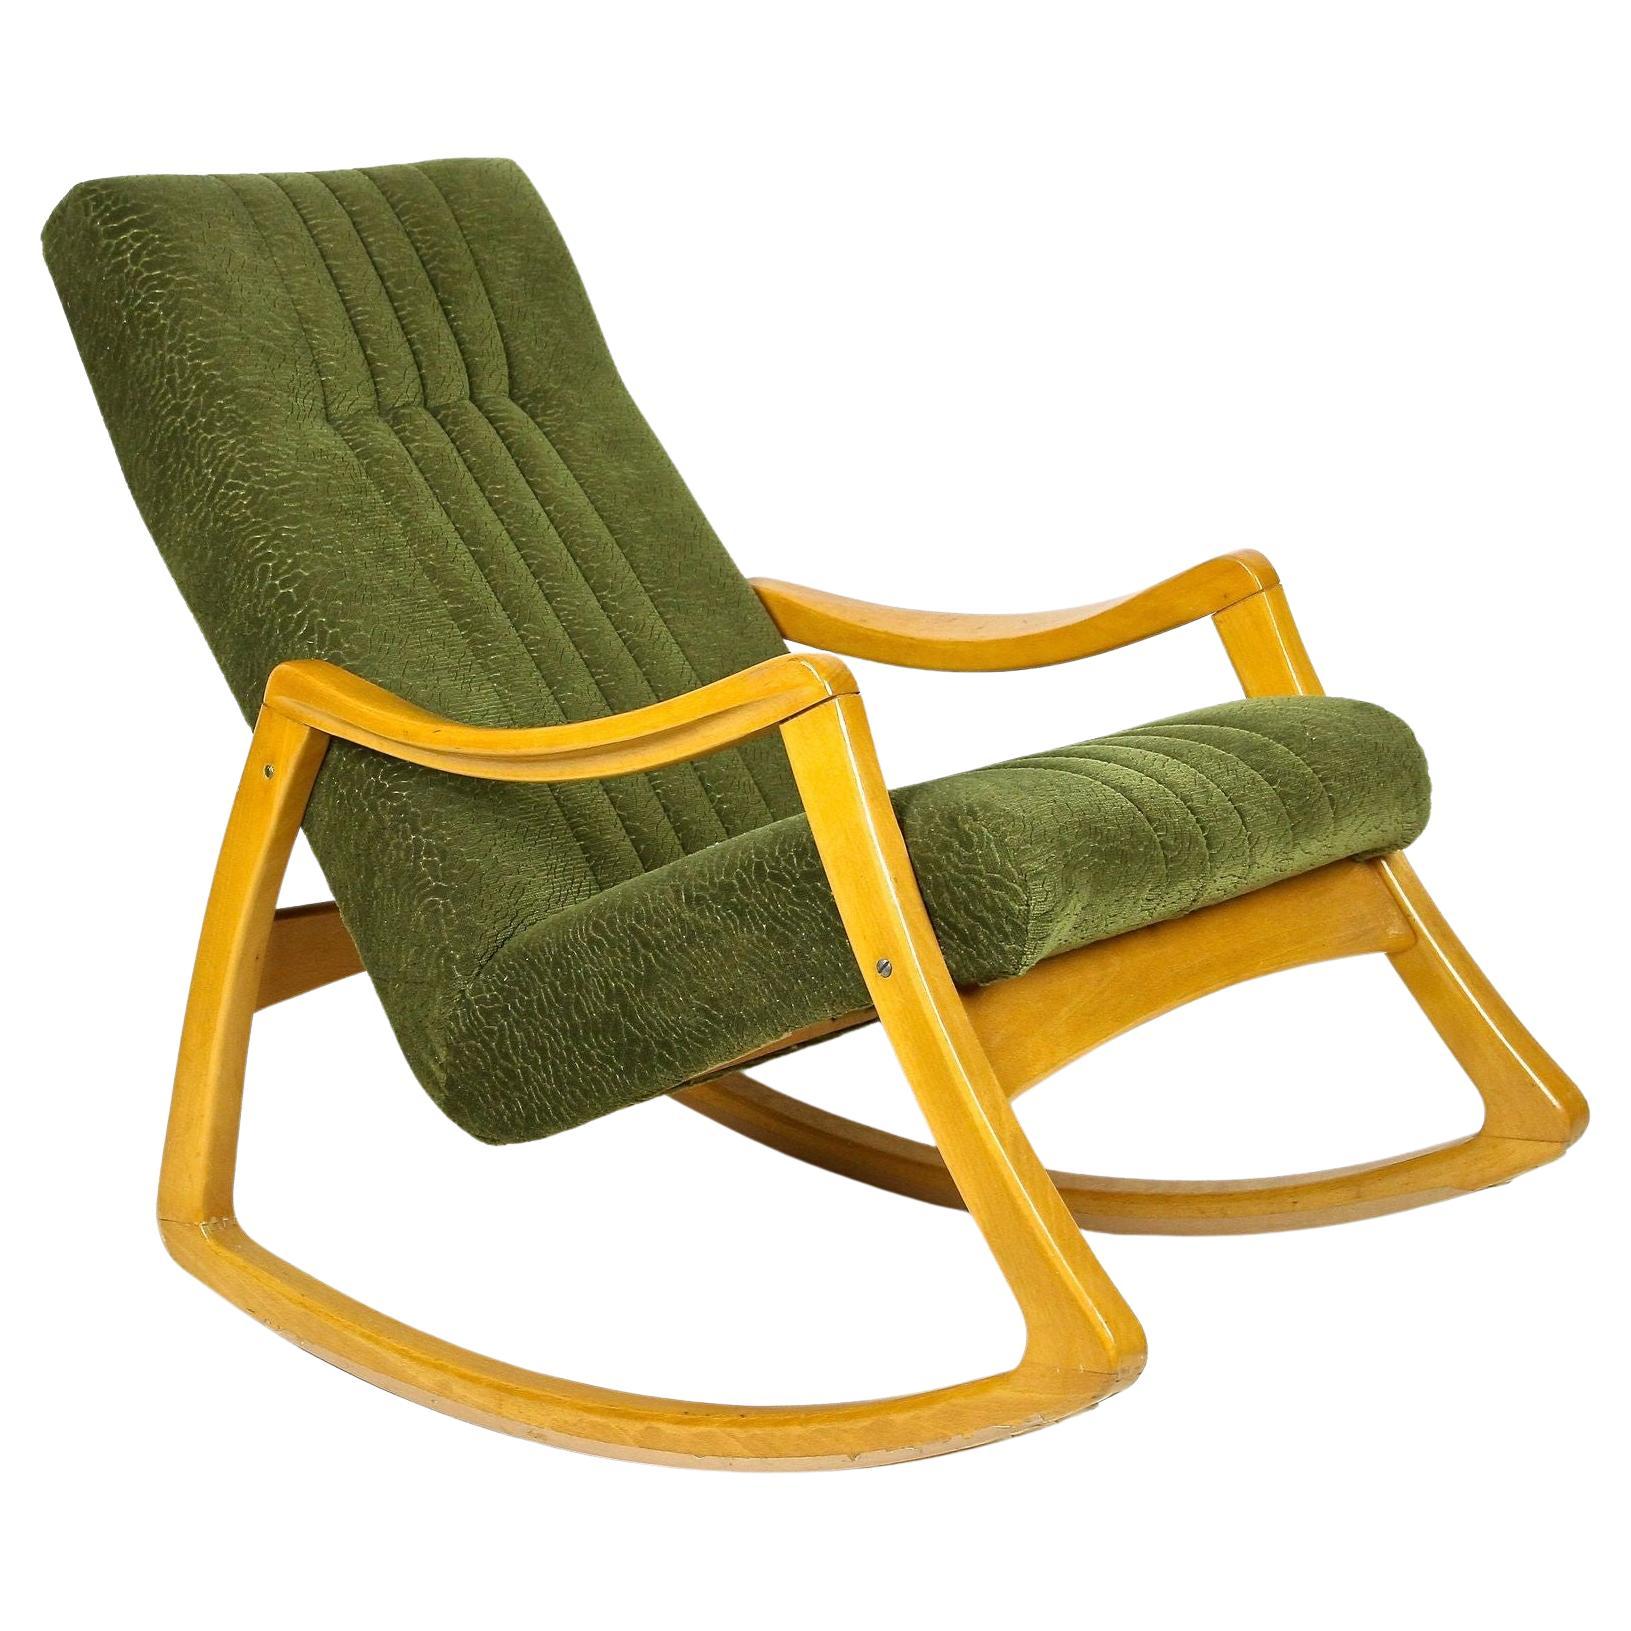 Mid-Century Modern Rocking Chair by TON with Original Fabric, CZ ca. 1953